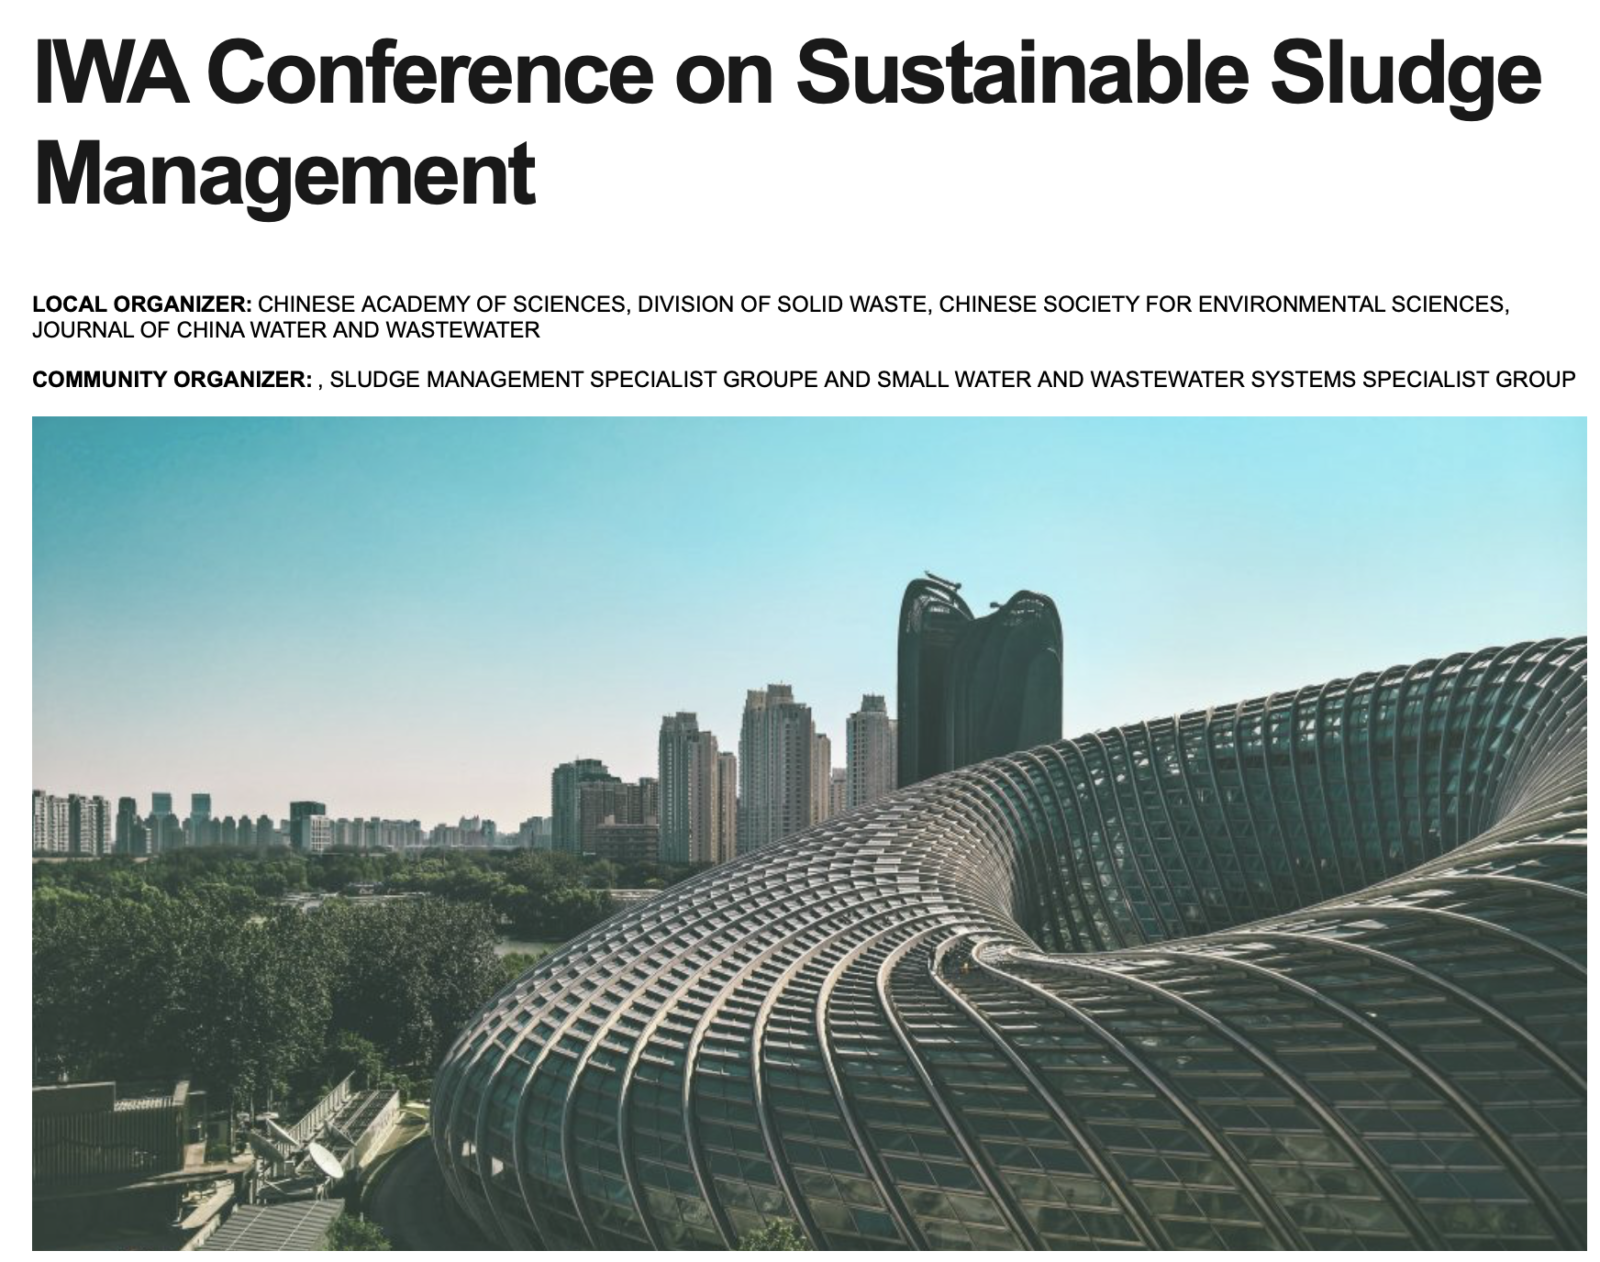 The 18th IWA Conference on Sustainable Sludge Management, May 17th-20th, Beijing, China